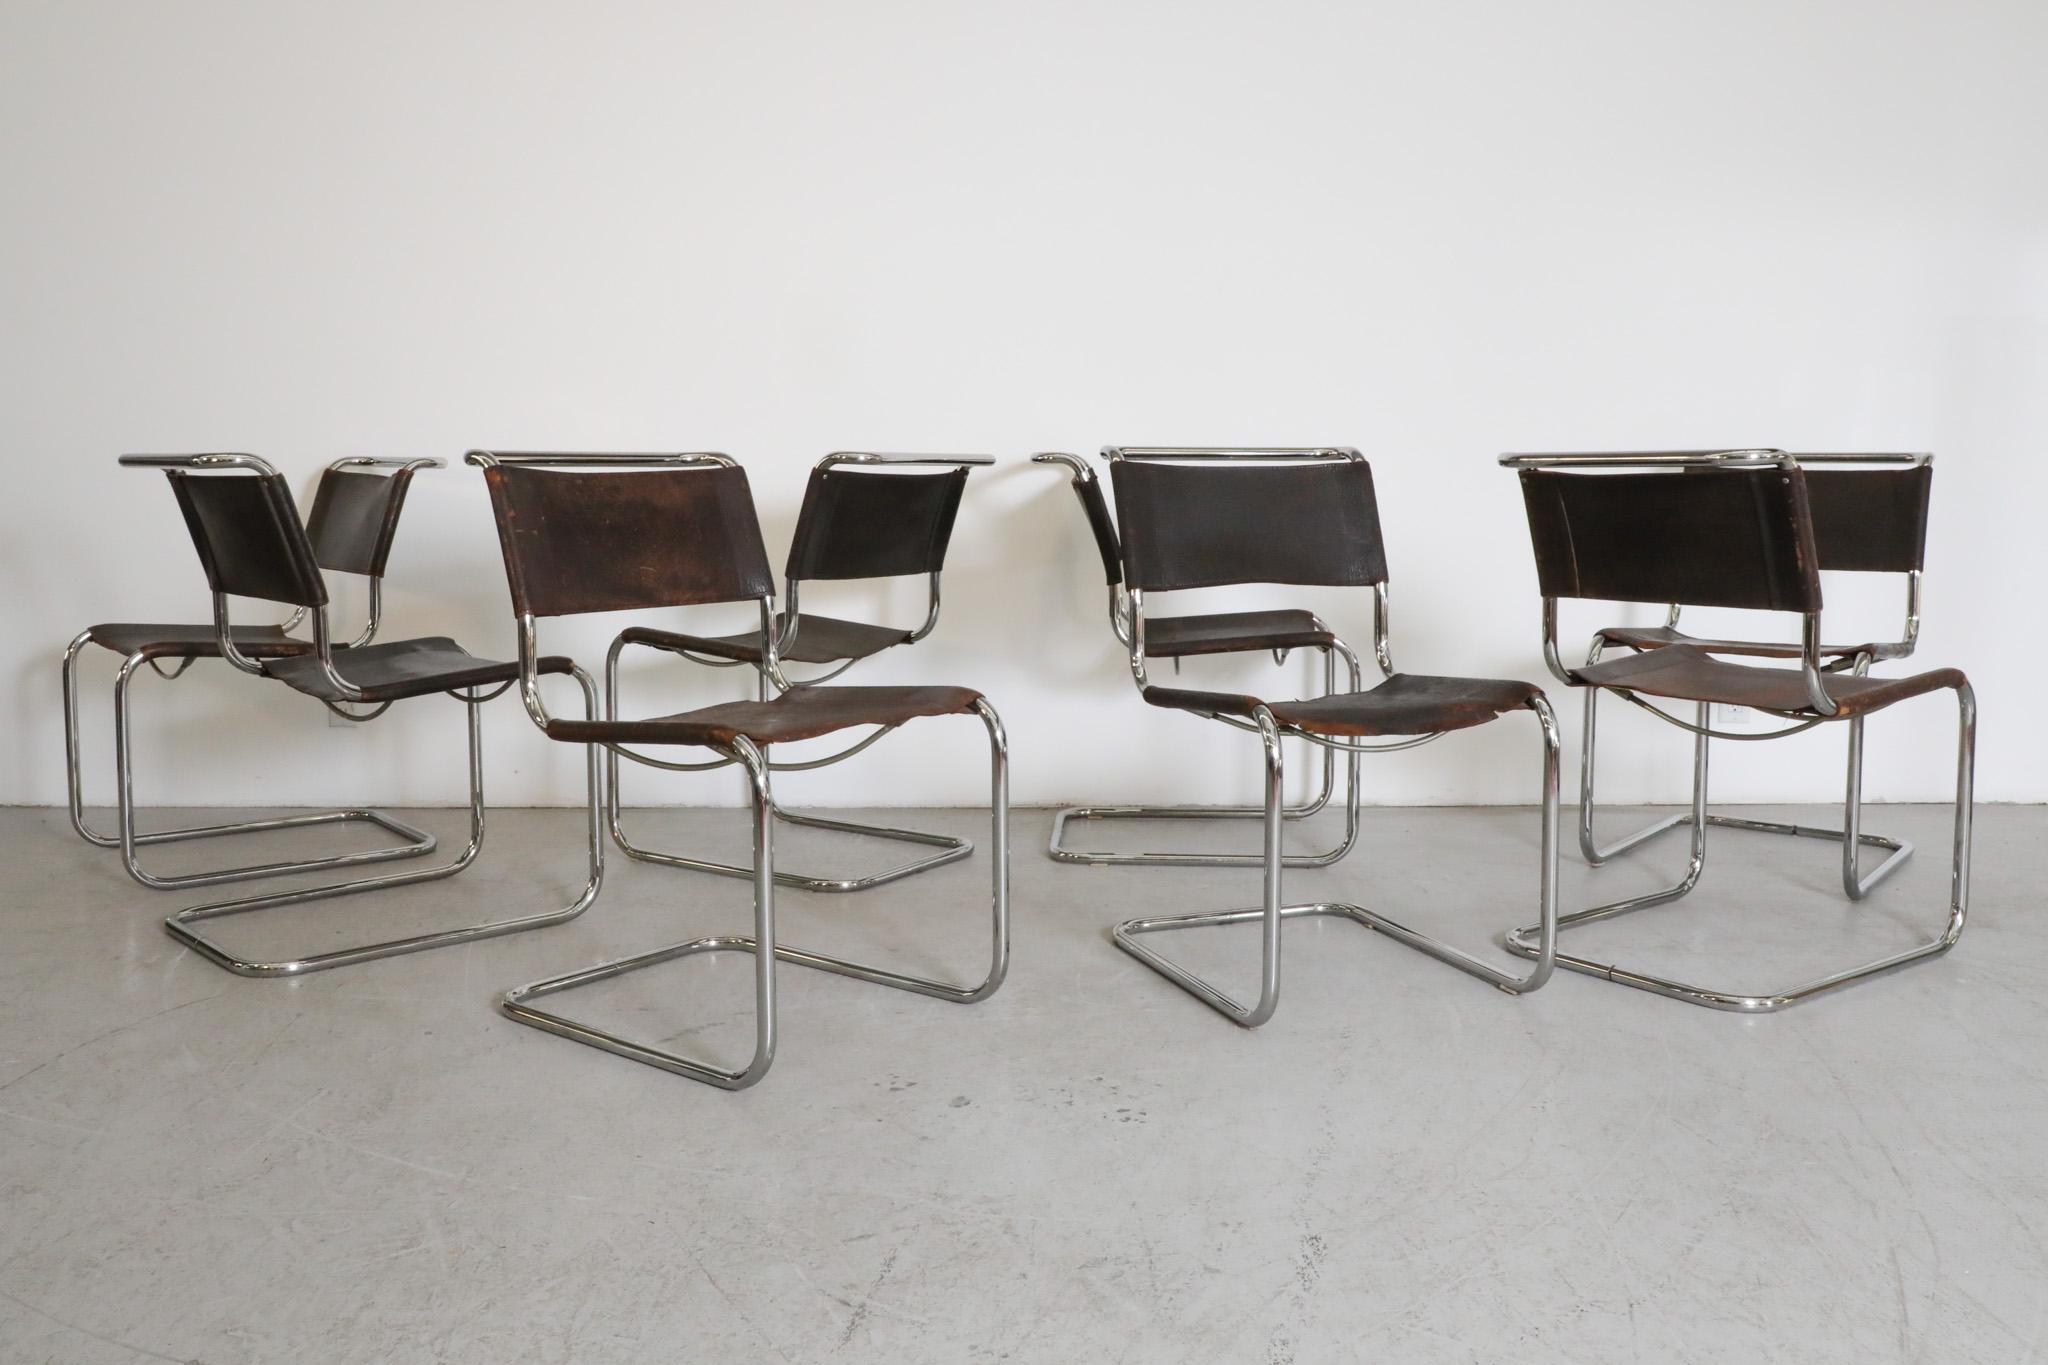 Set of 8 Mid-Century leather and chrome 'S33' dining chairs by Matt Stam for Thonet, 1970's. Original sling leather seats and backrests on tubular bent chrome frames. Classic styling with timeless design precisely executed to make a comfortable and